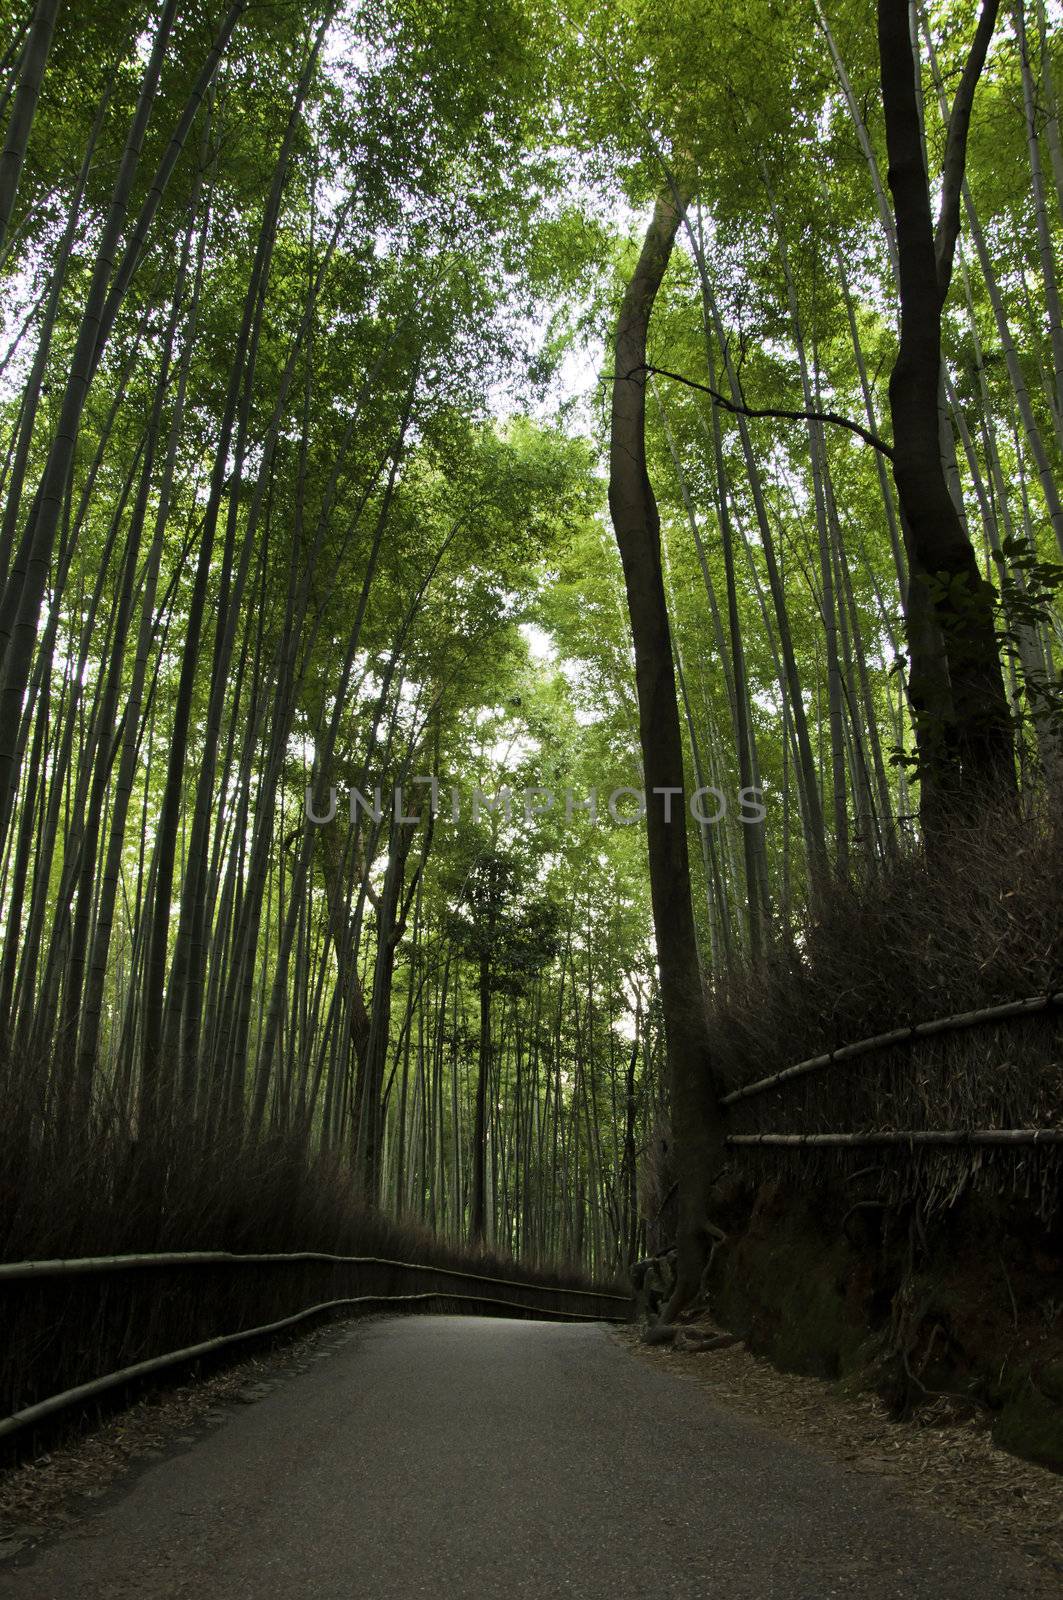 Famous bamboo grove at Arashiyama, Kyoto - Japan, near the famous Tenryu-ji temple. Tenryuji is a Zen Buddhist temple which means temple of the heavenly dragon and is a World Cultural Heritage Site.  